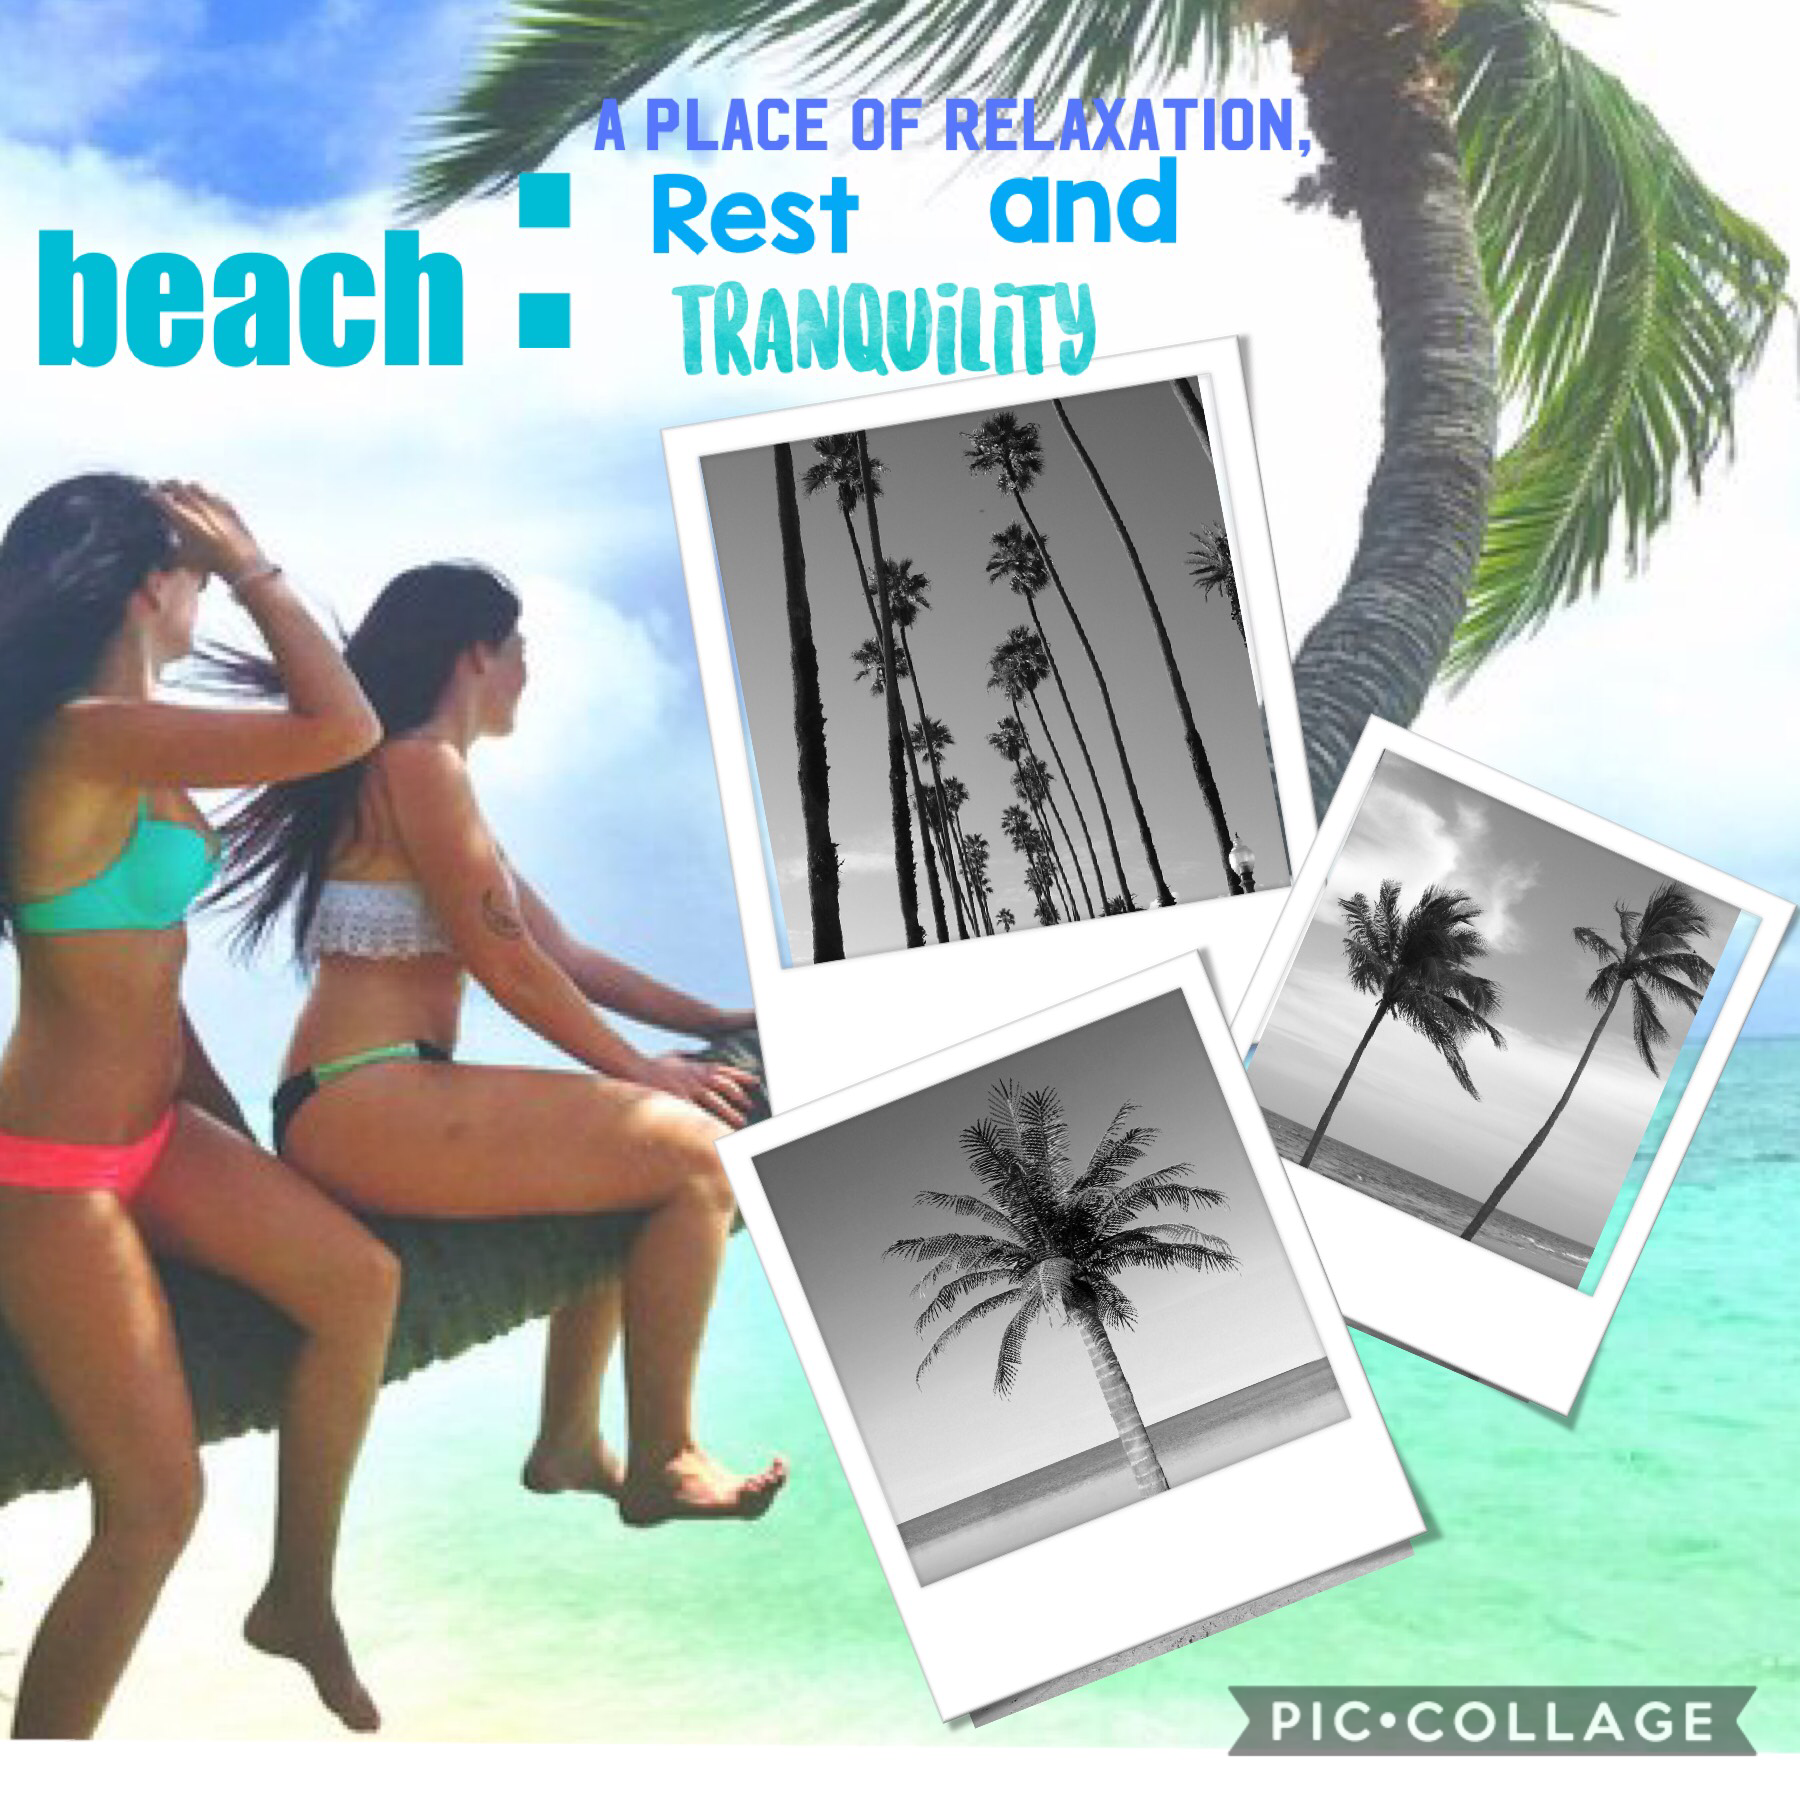 Beach!!! Tapp!!!!
Got inspiration by @oceaneyes. Make sure to go give her a follow!

QOTD: when do you go back to school?
AOTD: either January 7th or 8th




Fun facts: My name is Shelbie.
                   My favorite color is purple.
                  